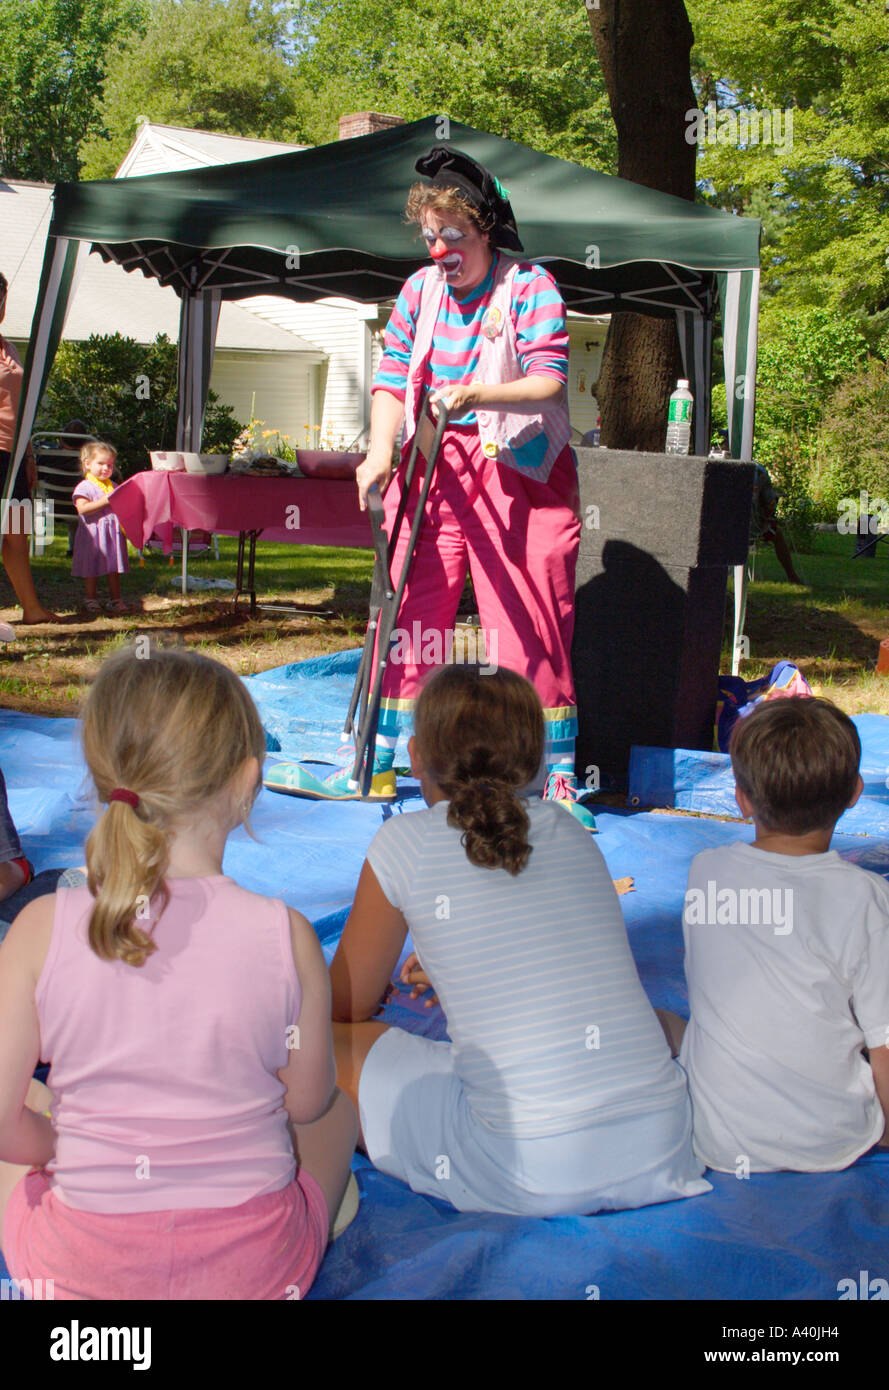 A Clown entertains children at a family picnic part of the USA lifestyle Stock Photo